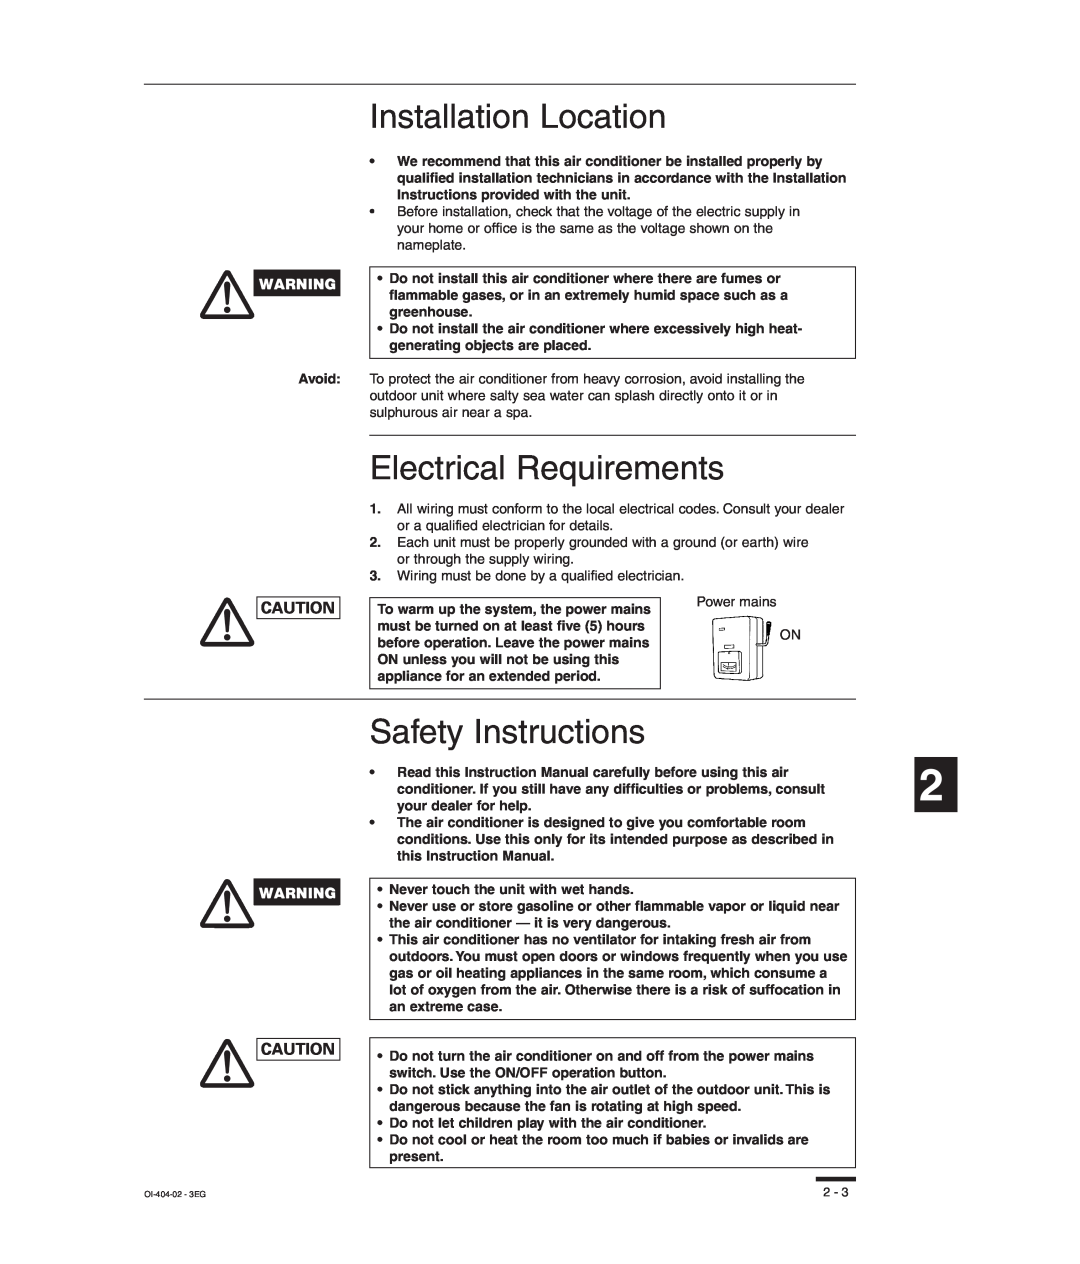 Sanyo RCS-SH80UA, TM-SH80UG Installation Location, Electrical Requirements, Safety Instructions, your dealer for help 